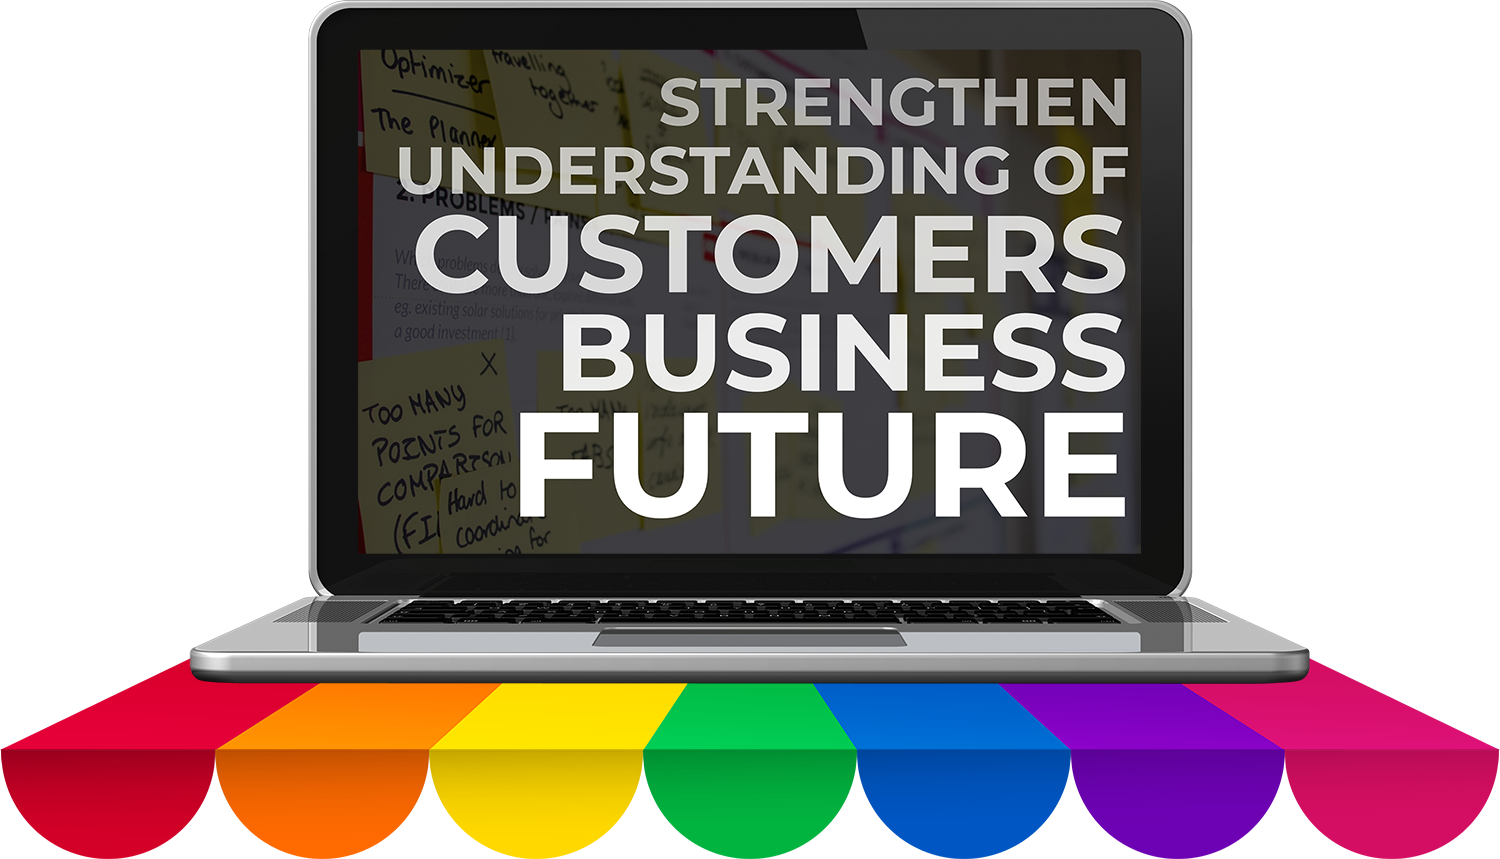 Using your business plan to inform your brand, will strengthen your understanding of your customers, your business, and your future. I'll show you how in "Why Design Matters"